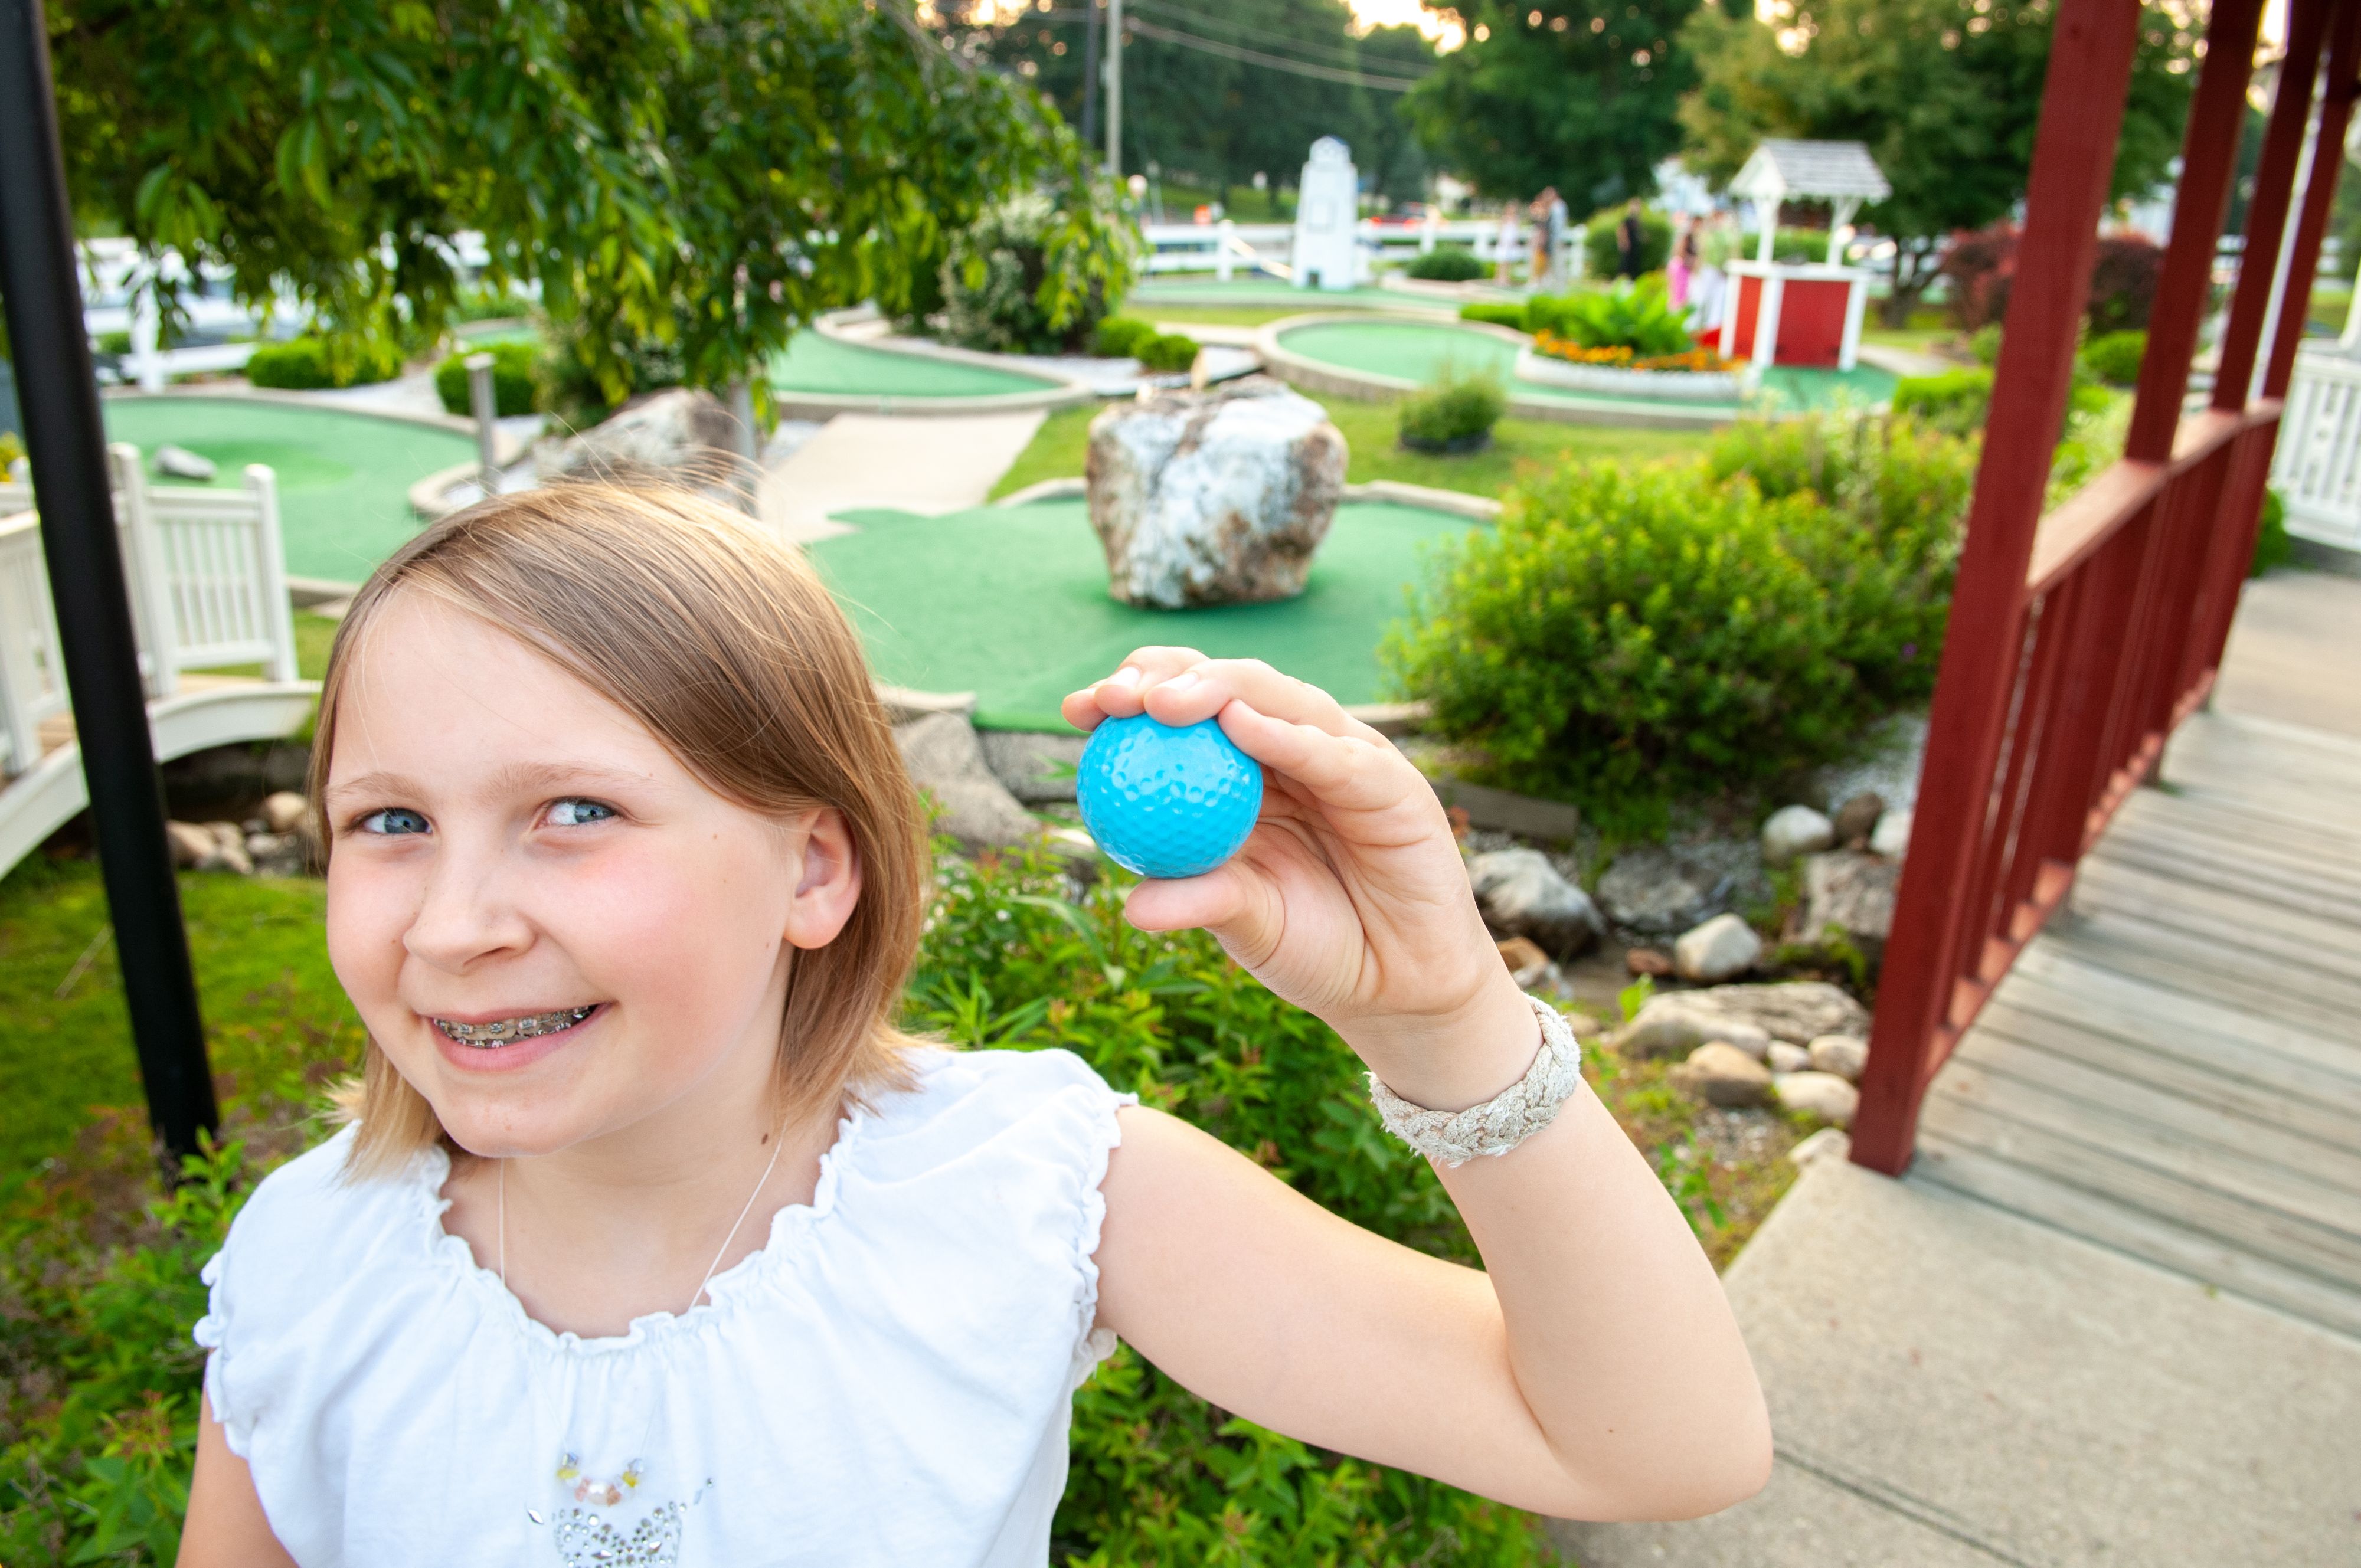 Girl in braces smiles and holds golf ball at mini golf course